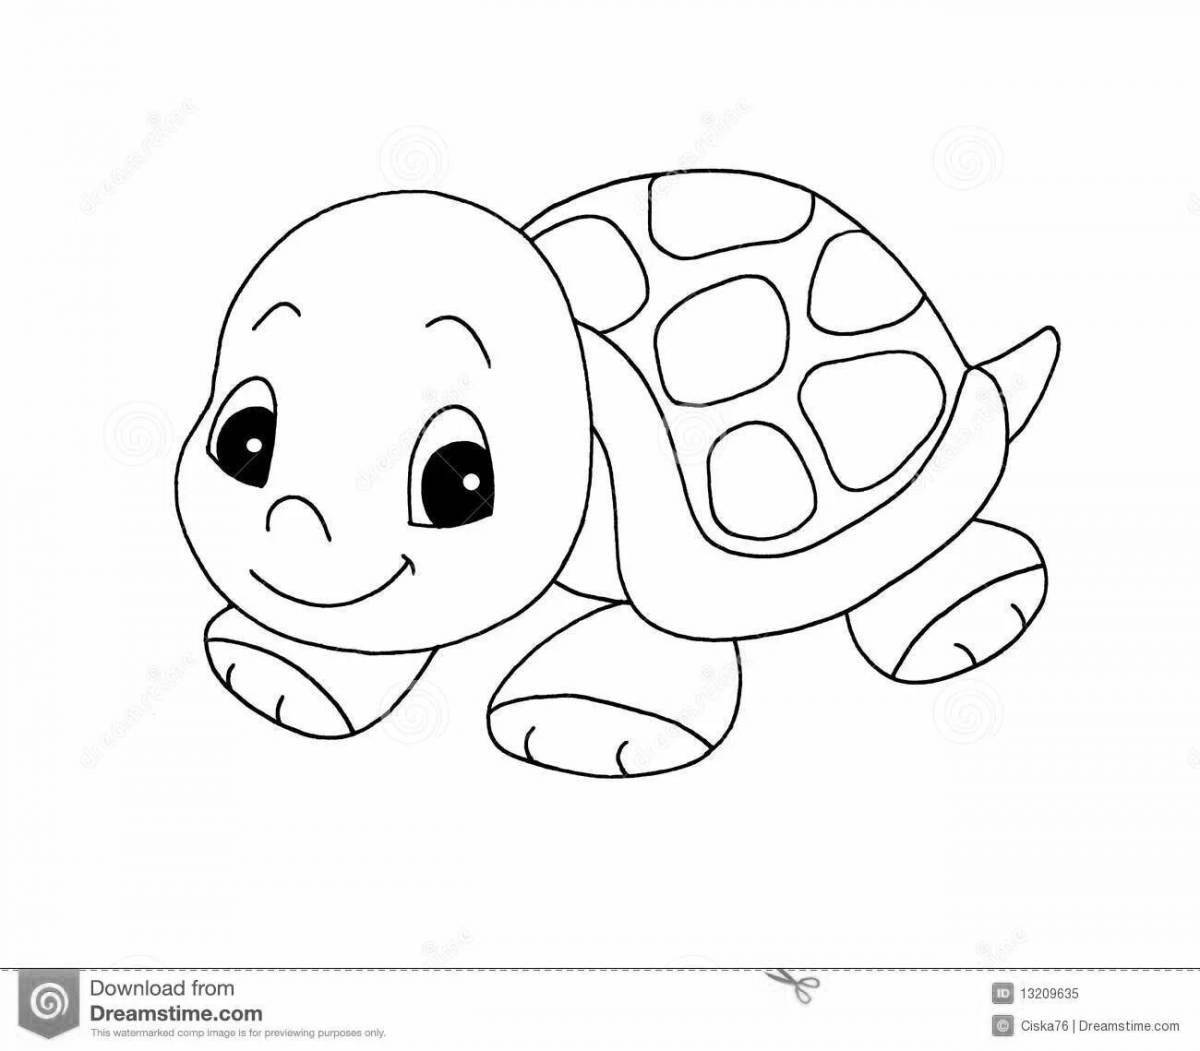 Quirky cute turtle coloring book